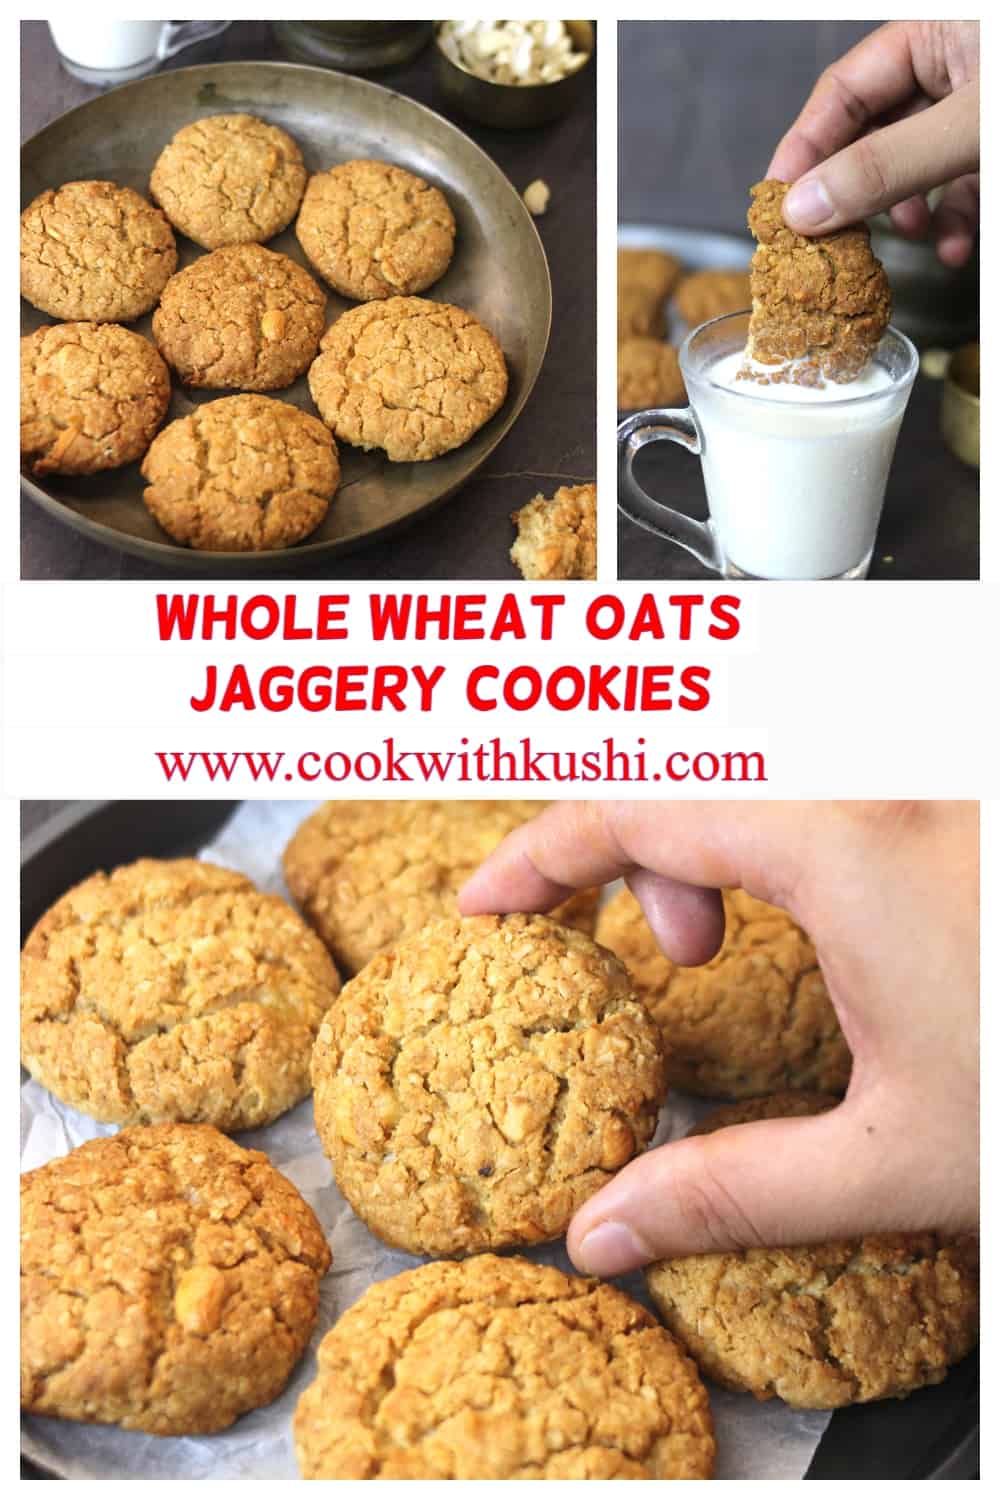 best, easy and healthy whole wheat oatmeal oats jaggery cookies for Diwali, Thanksgiving, Christmas 